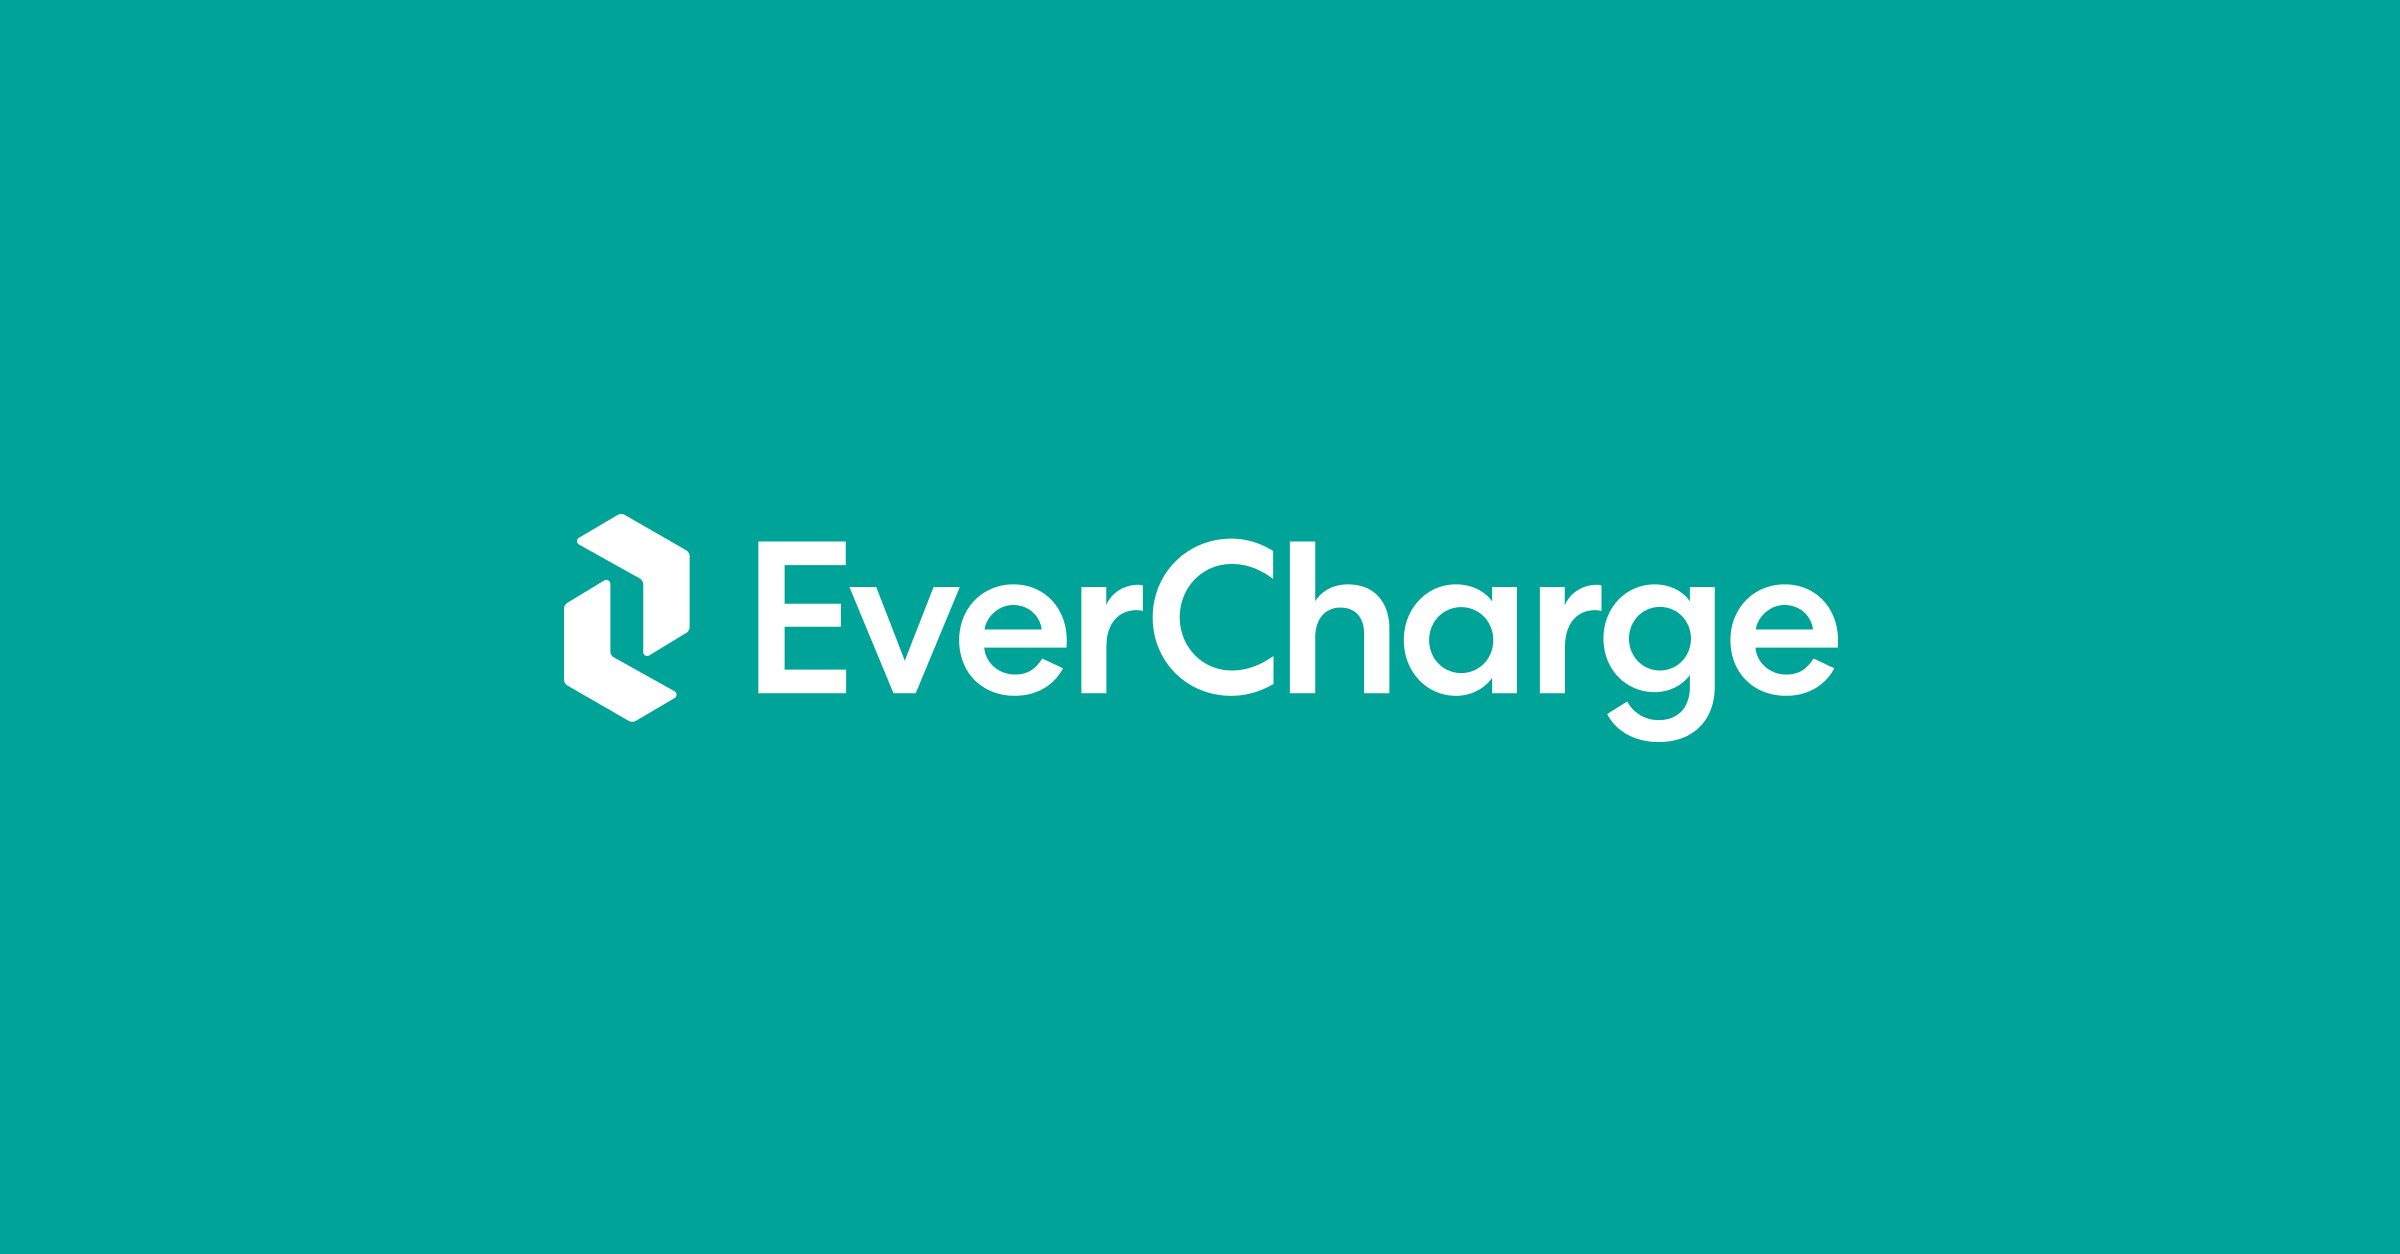 EverCharge Announces Expansion of Fleet Portfolio Offerings to Provide an Integrated EV Charging Experience